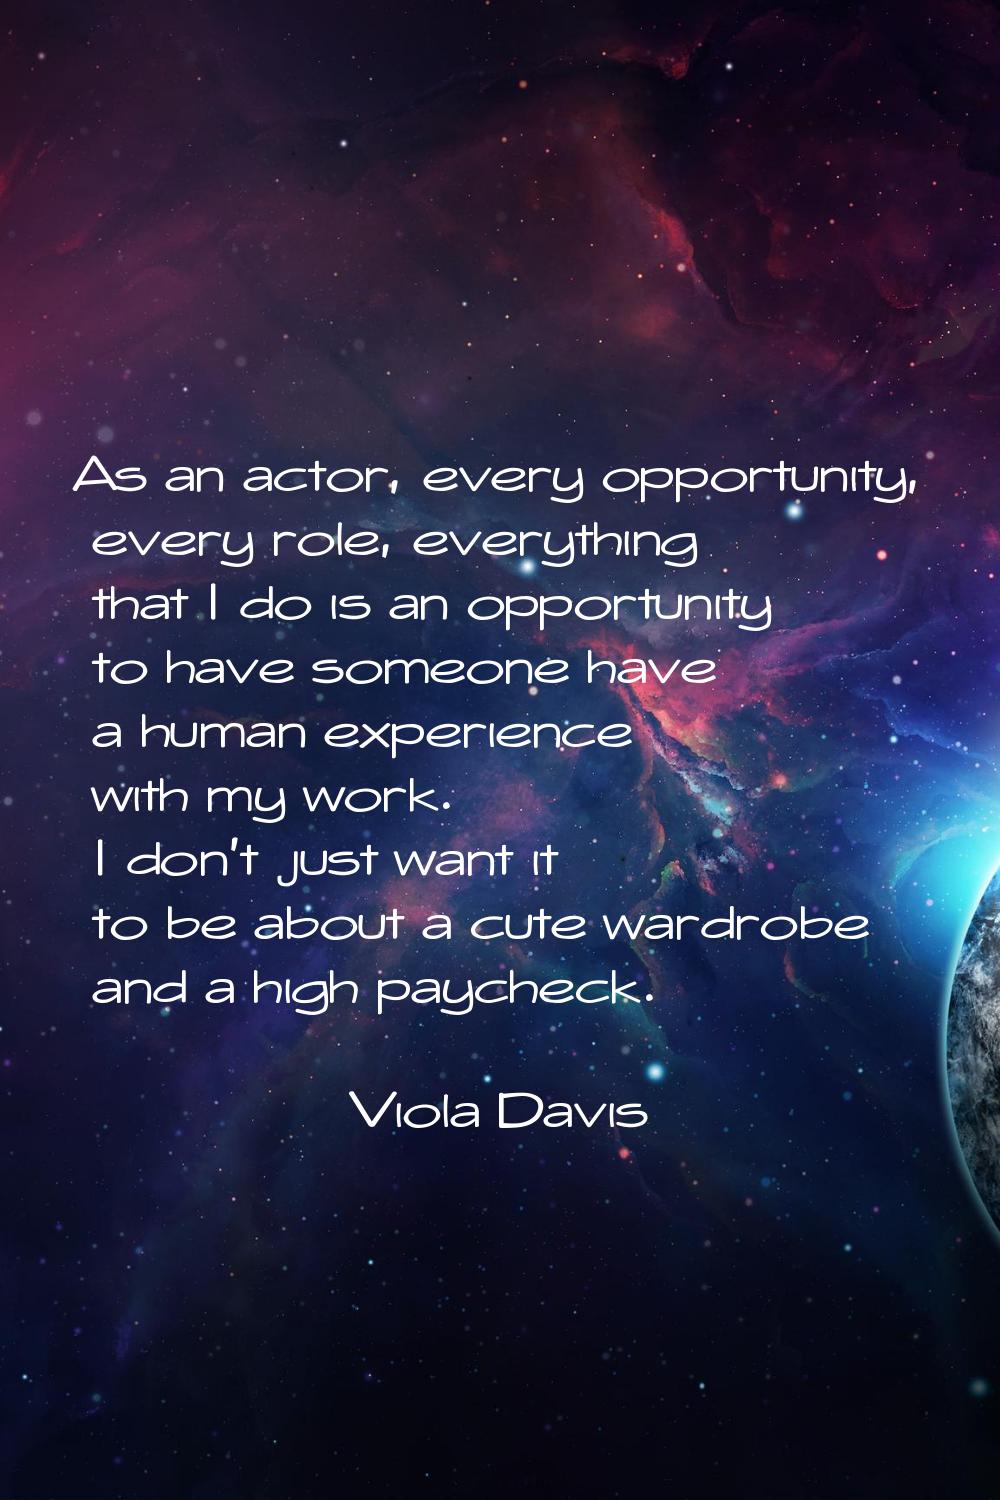 As an actor, every opportunity, every role, everything that I do is an opportunity to have someone 